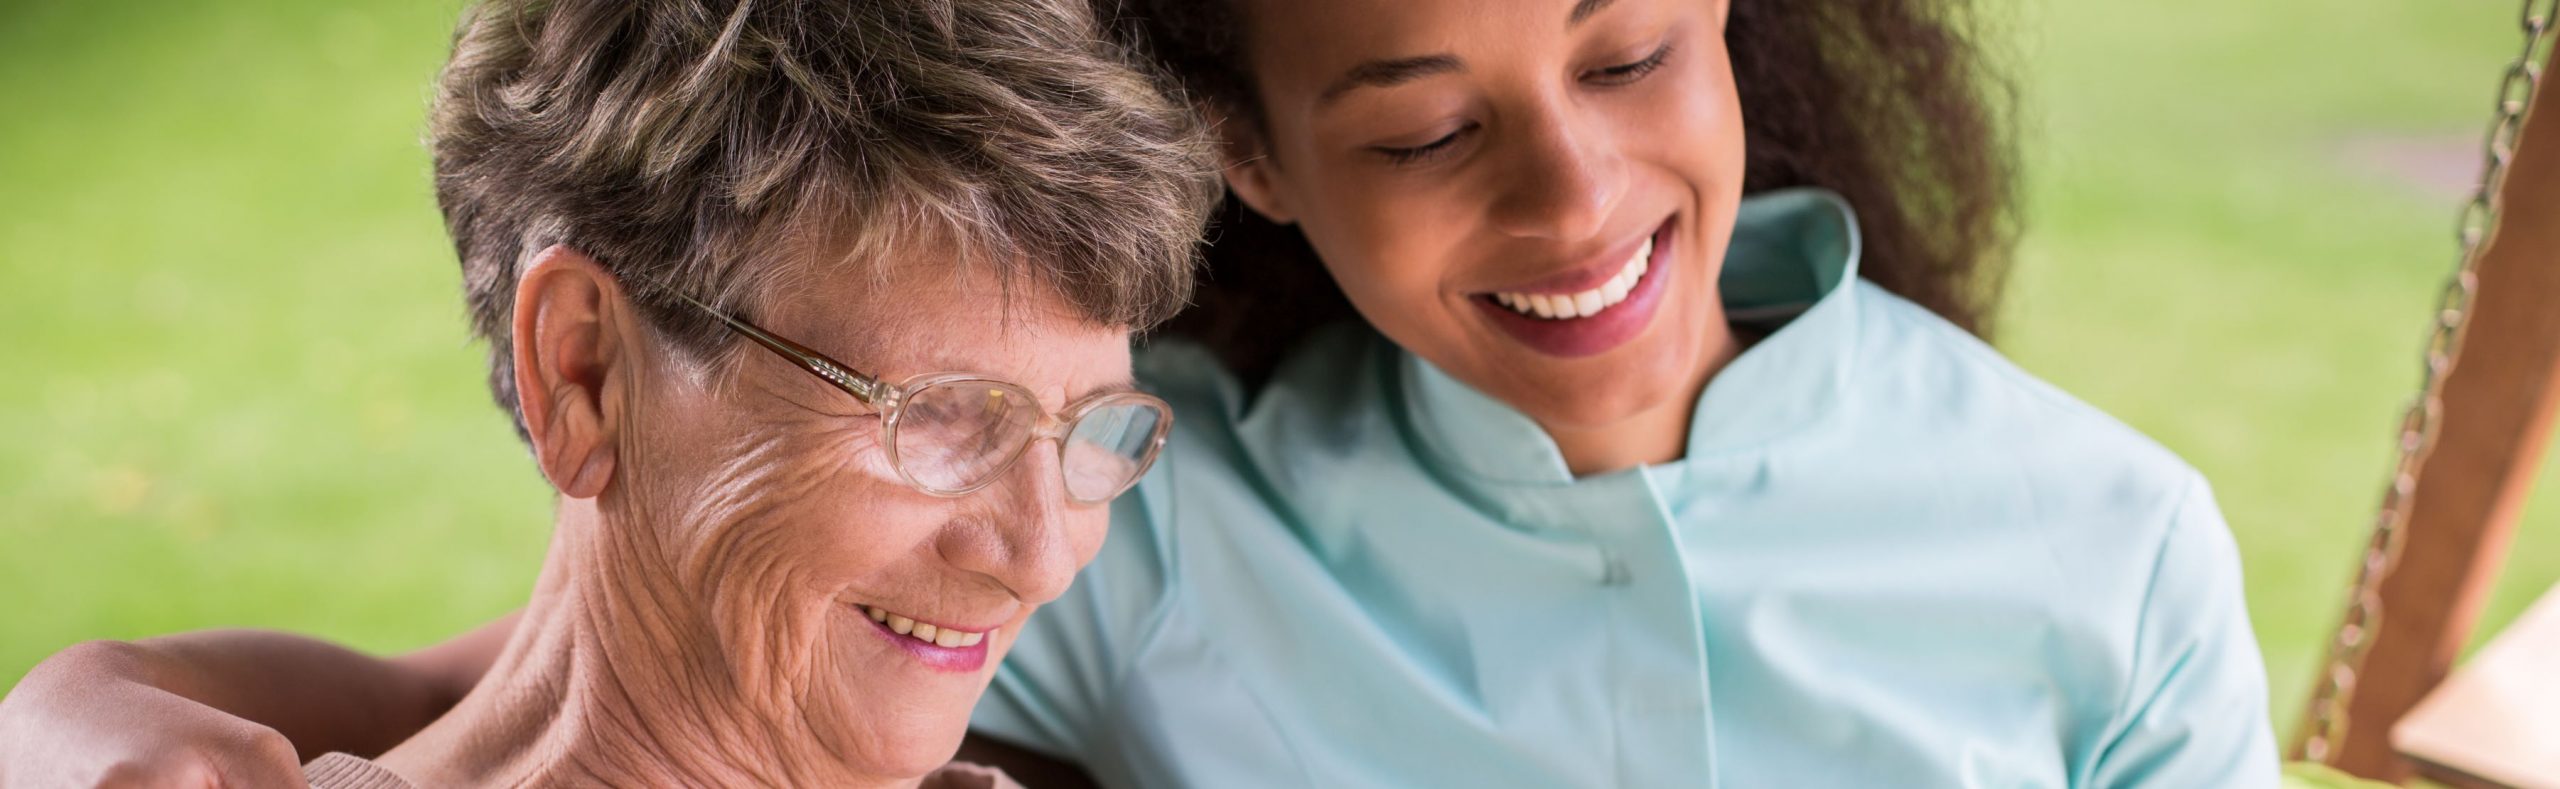 Caregiver assisting a retired person a long-term care facility.